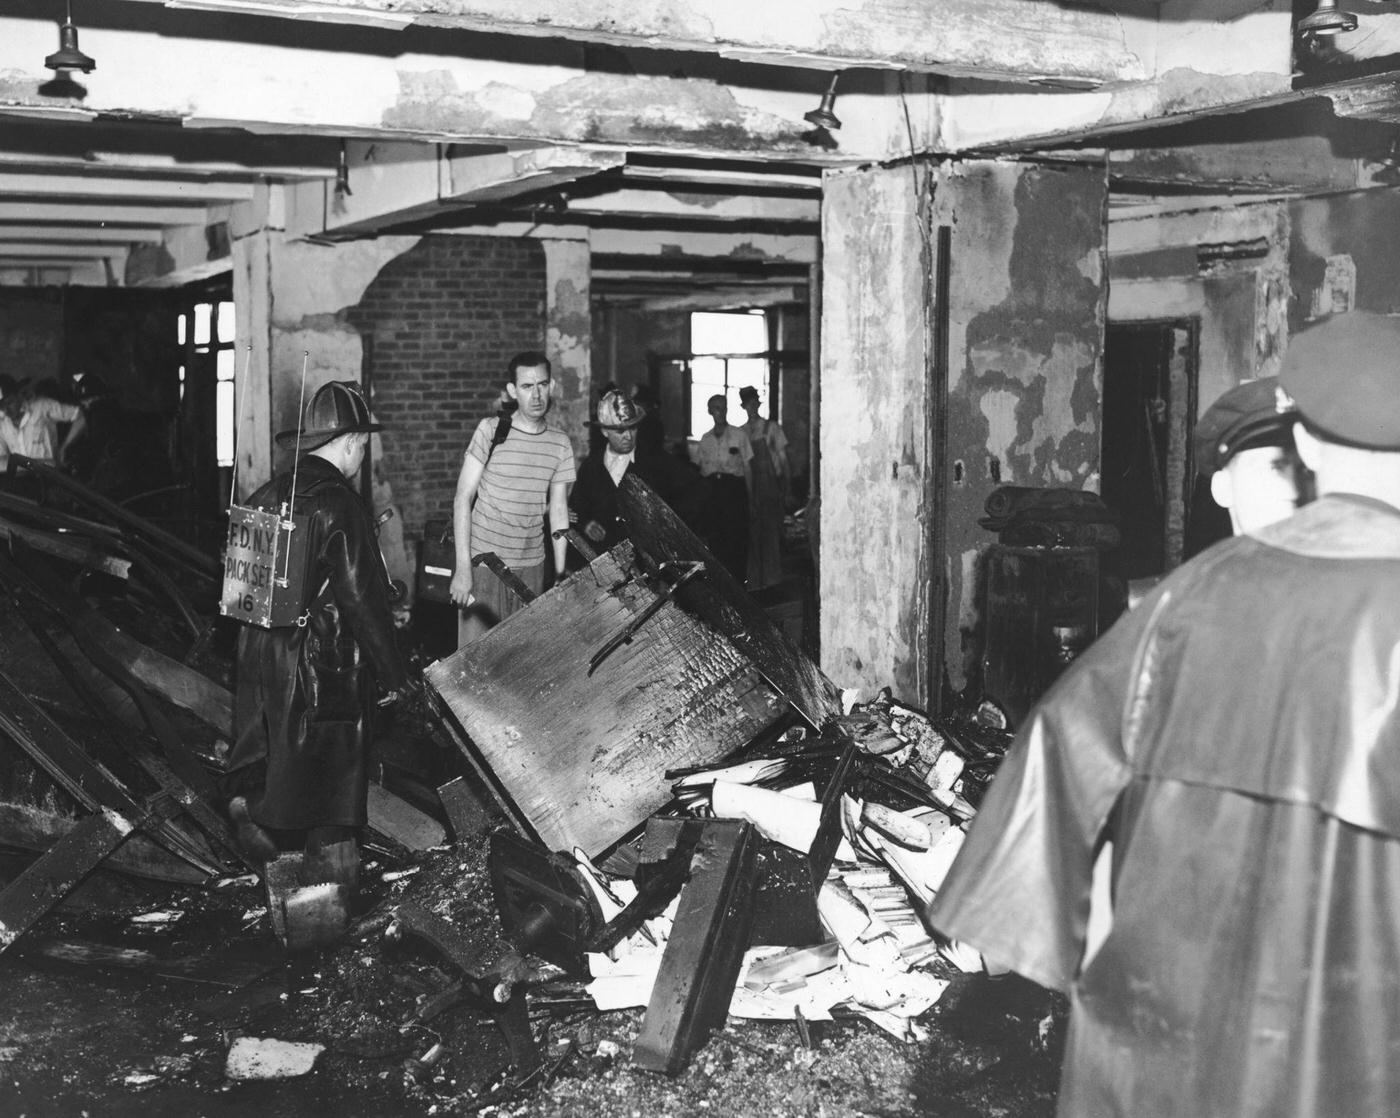 Police and firemen examine a burned out office on the 79th floor of the Empire State Building, 1945